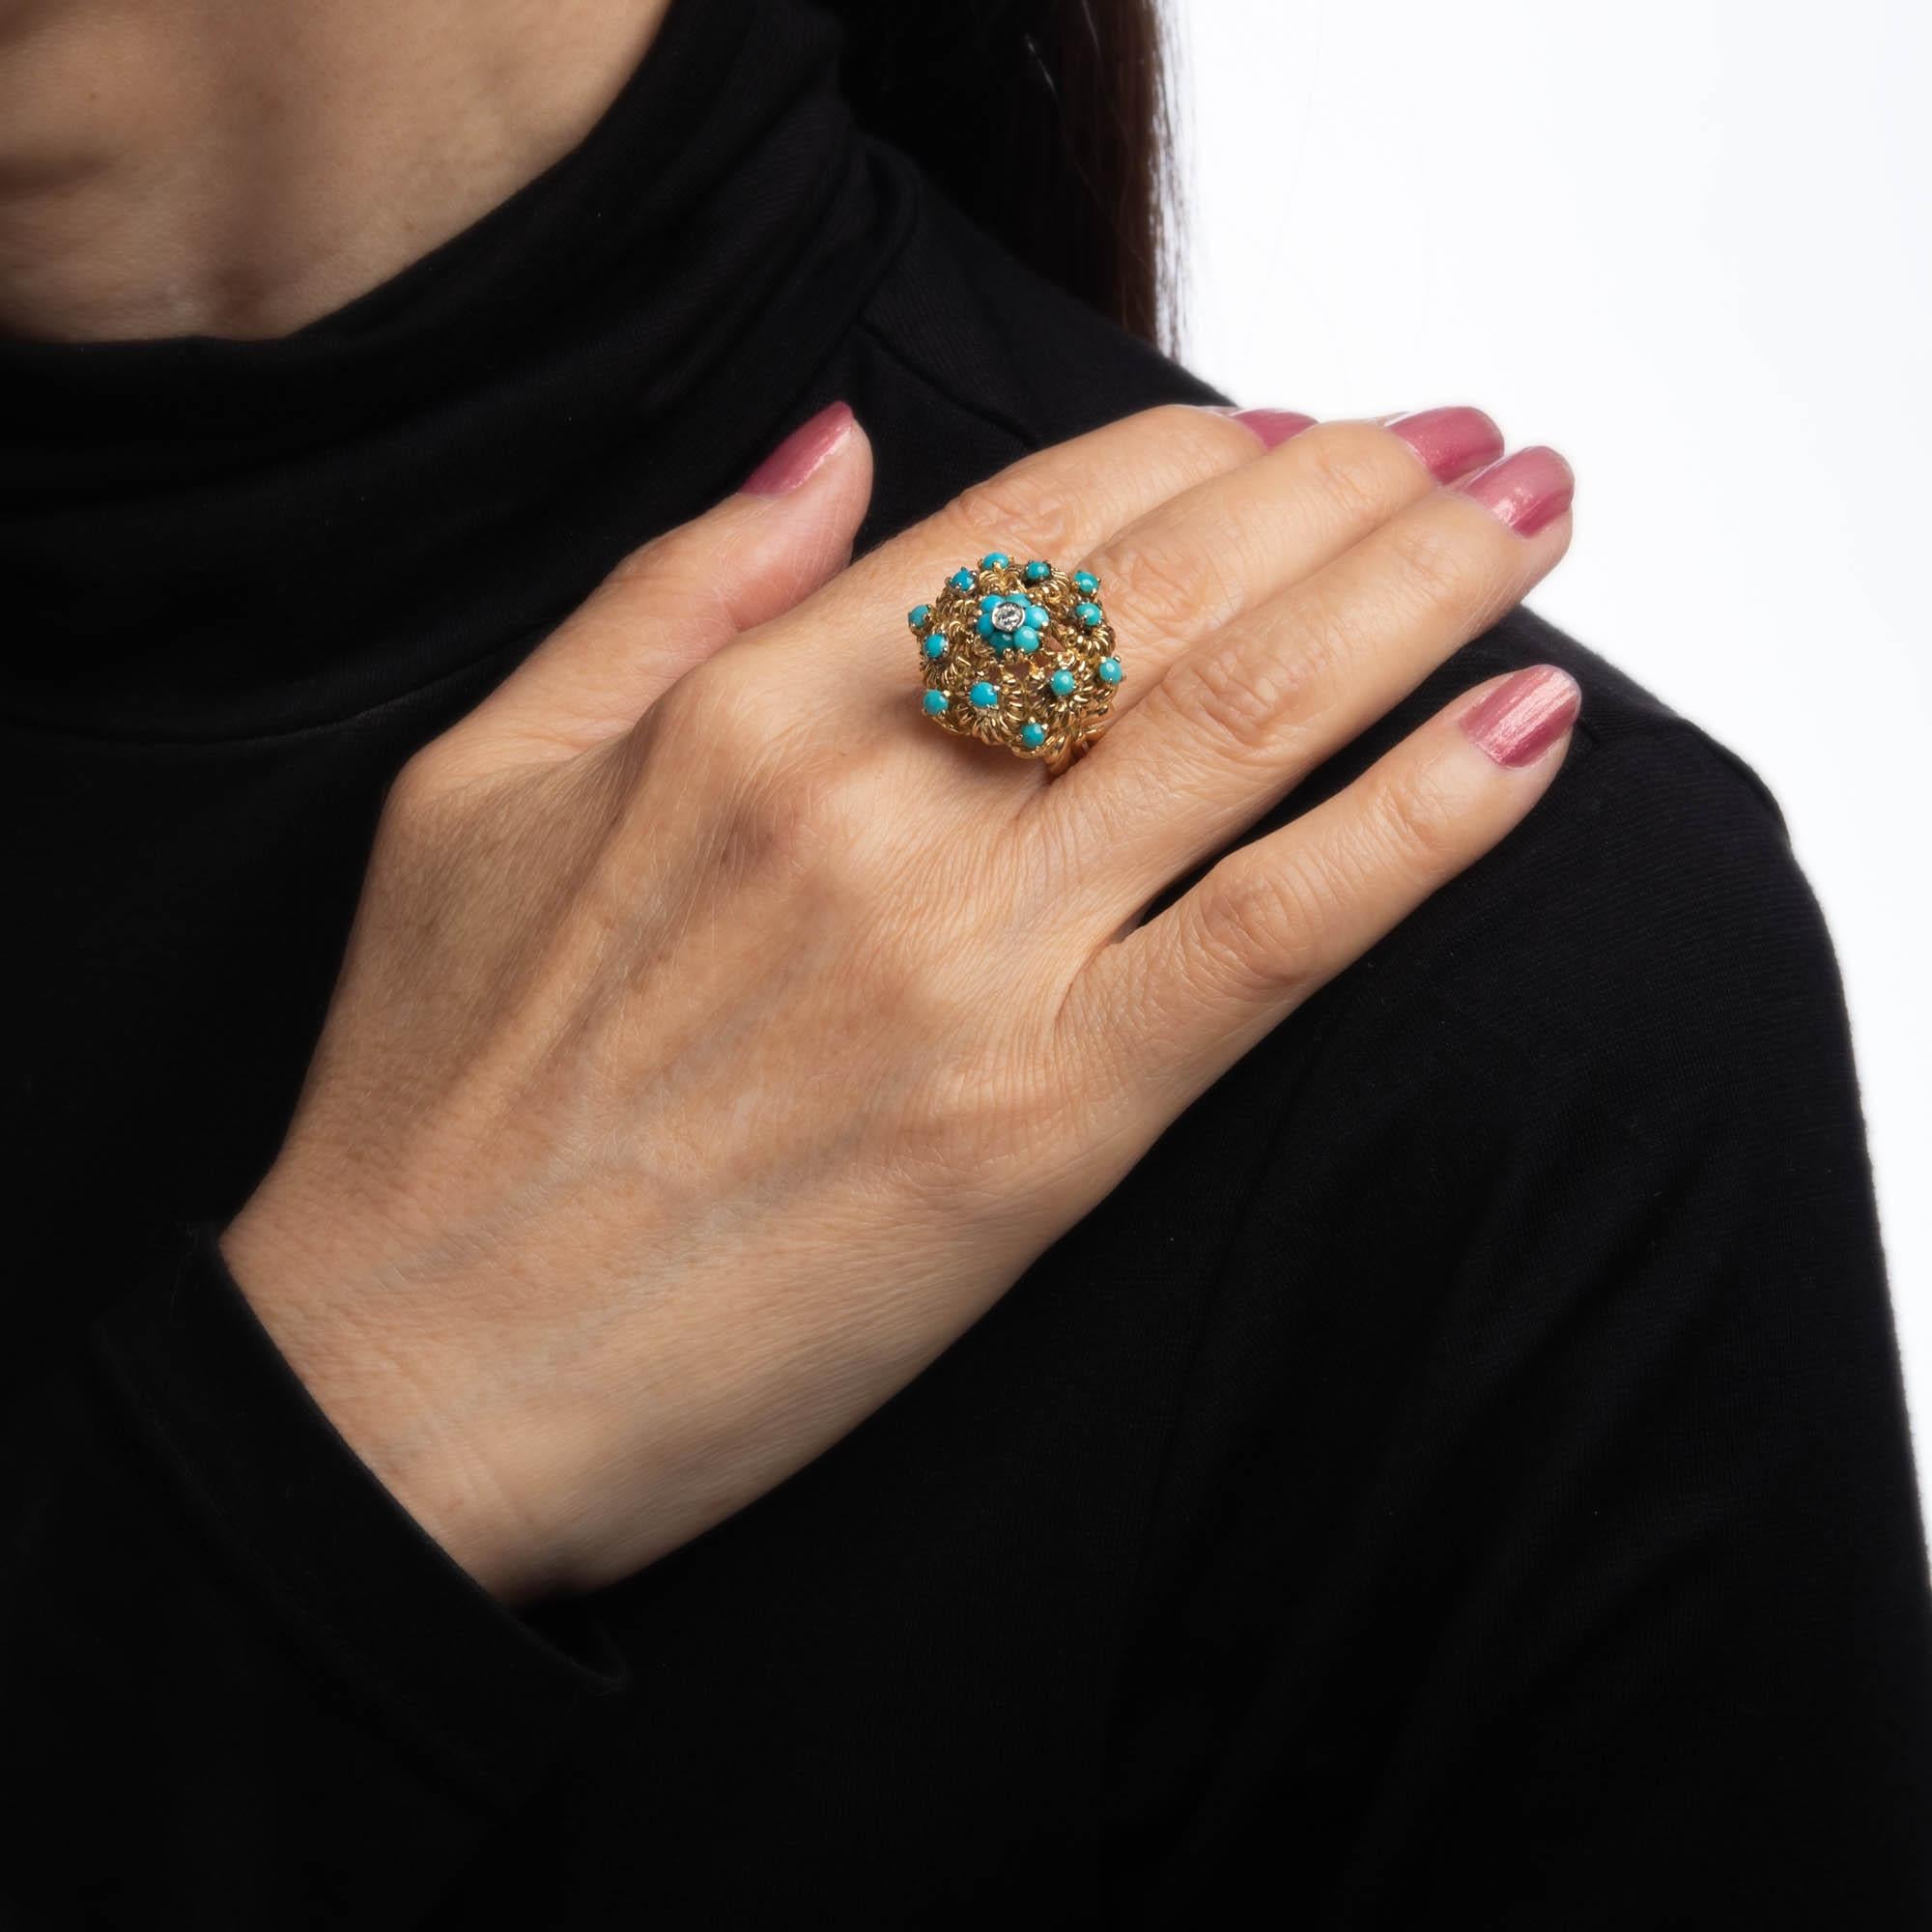 Women's Turquoise Diamond Cluster Ring Vintage 18 Karat Yellow Gold Large Dome Jewelry